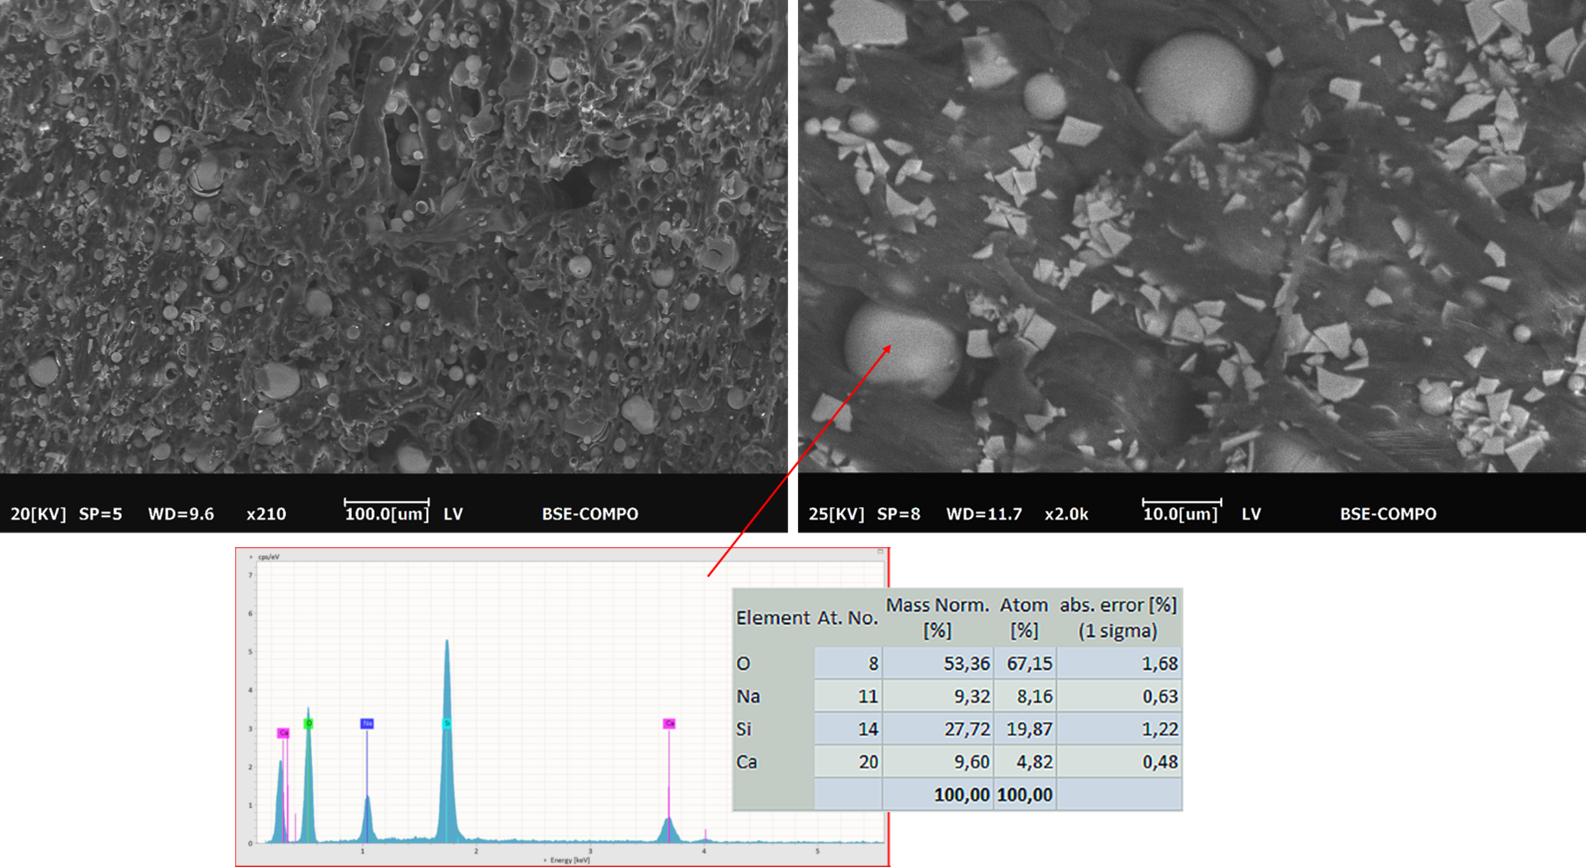 SEM-BSE images taken in Low Vacuum mode with Coxem CX-200plus at 20 and 25 kV on a polypropylene (PP) sample added with inorganic fillers. EDS spectrum at 15 kV shows the composition of the filler such as a silicate